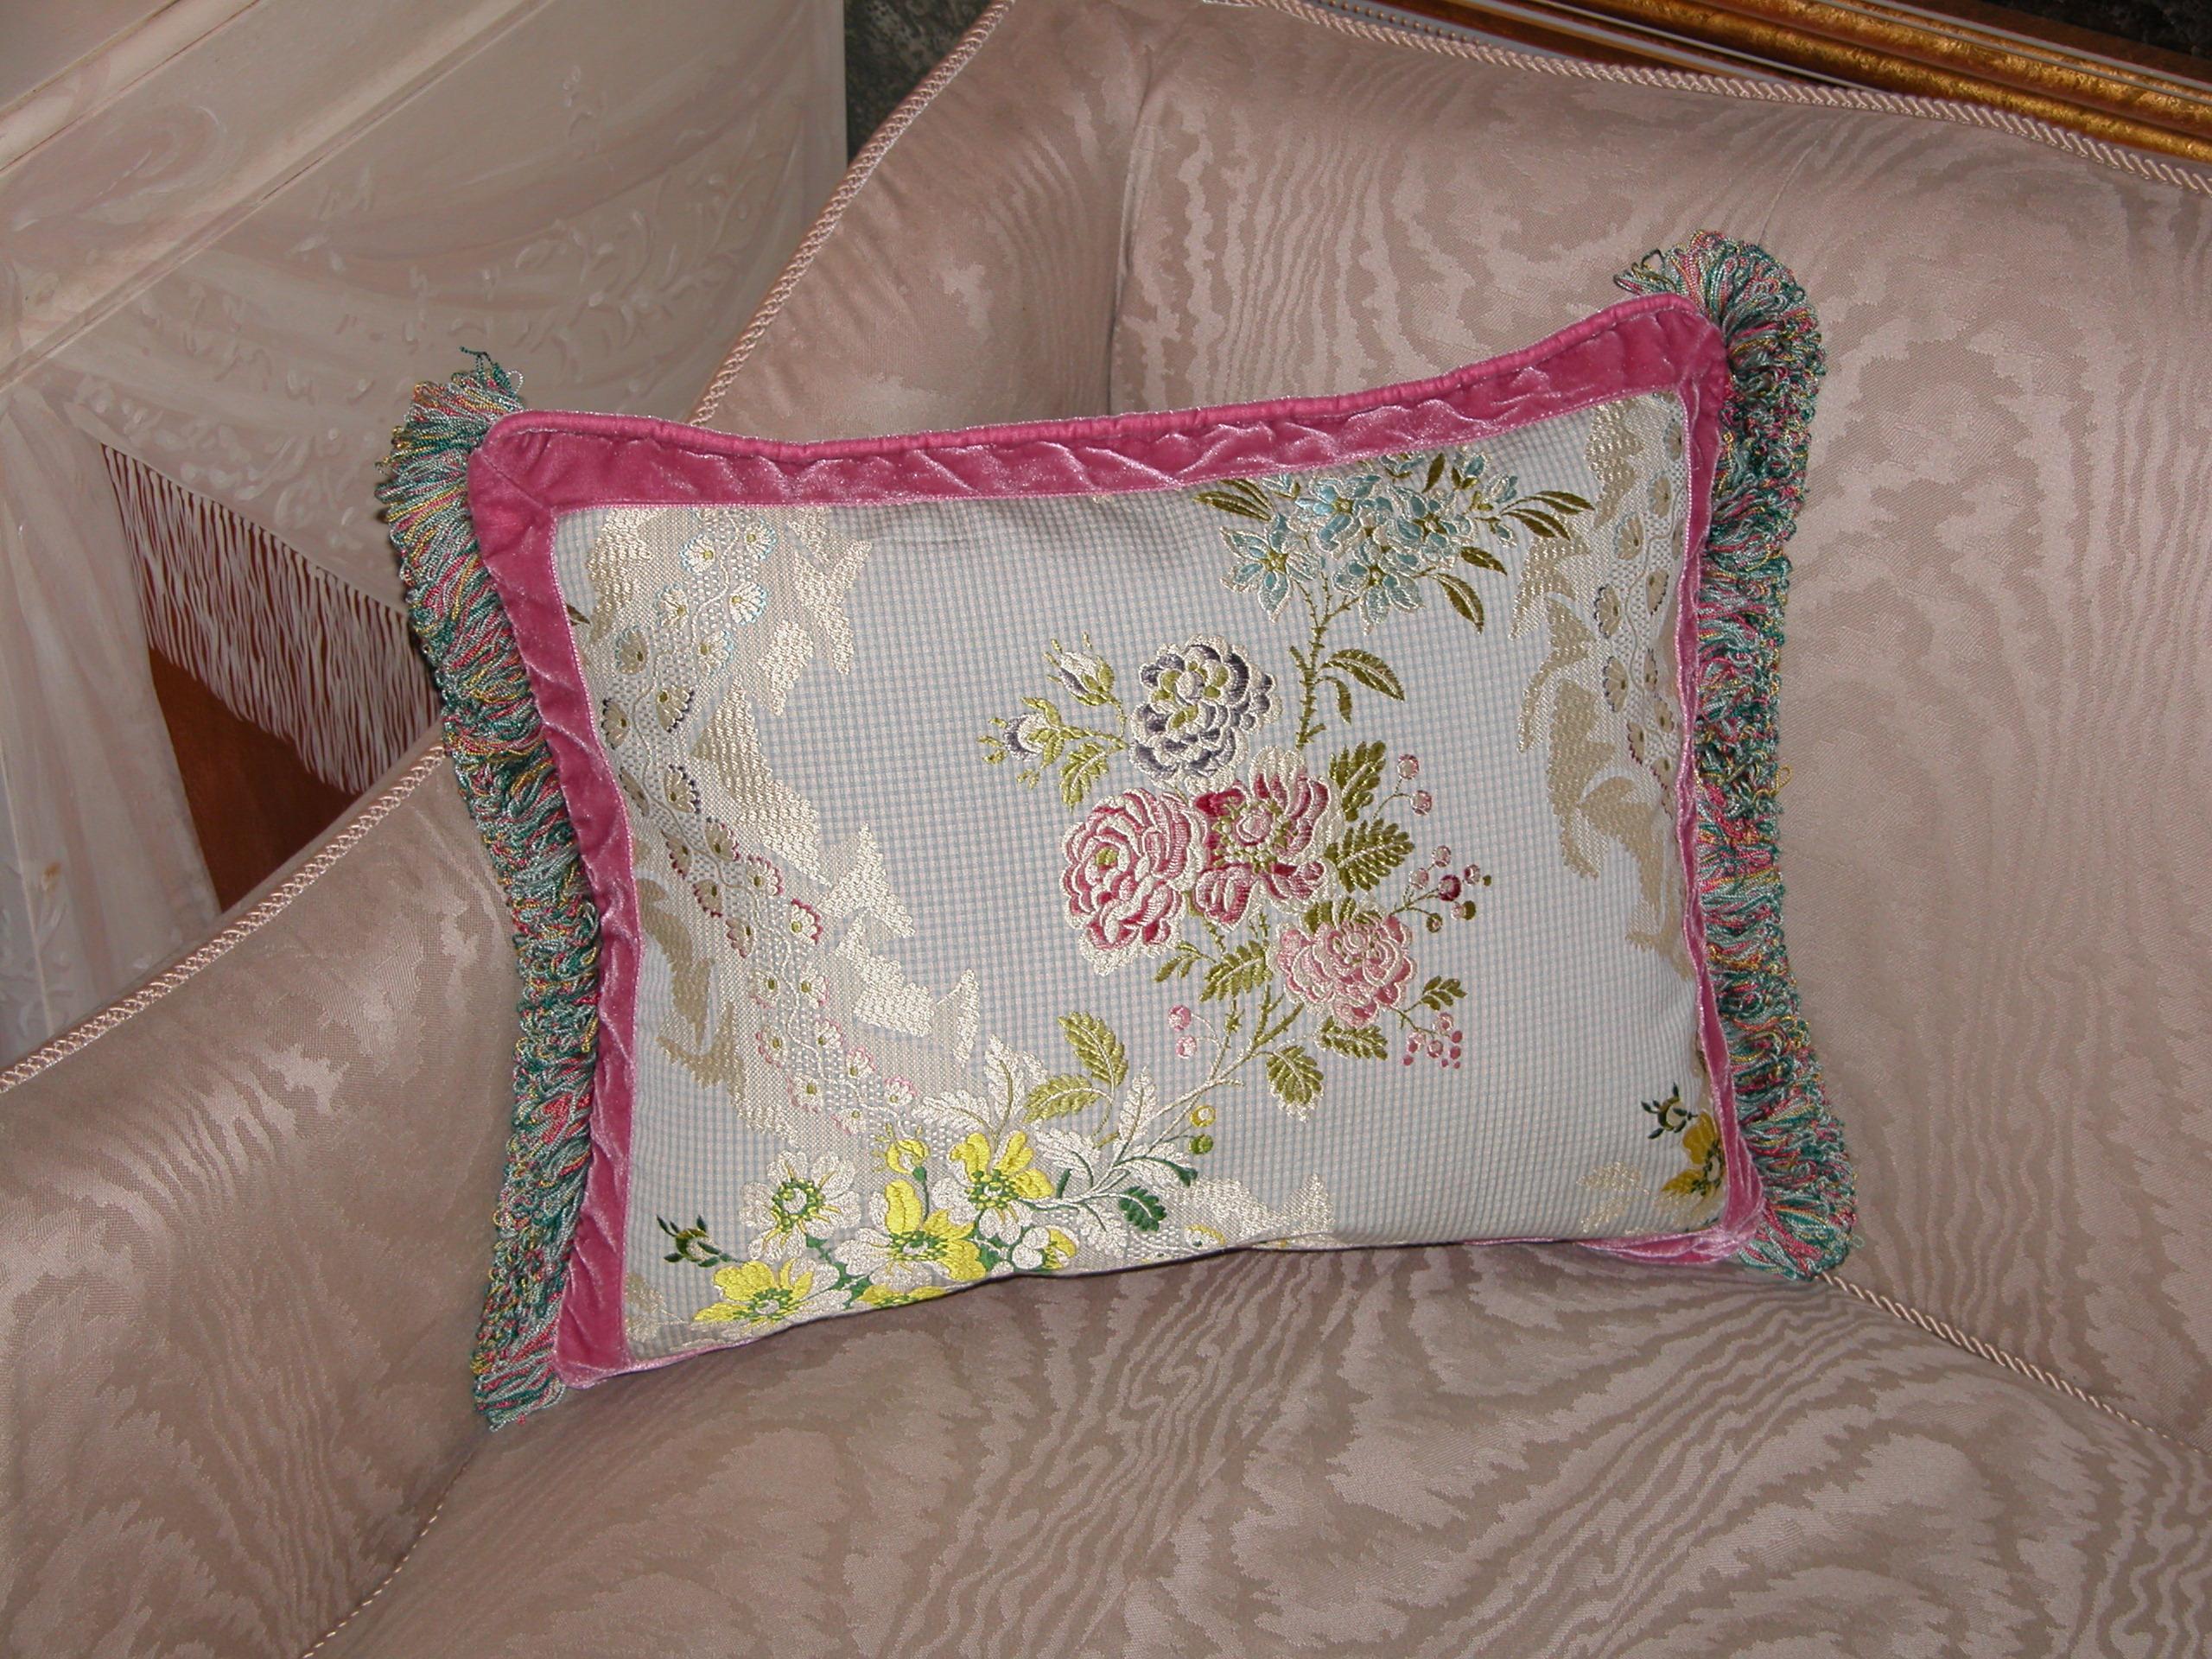 Throw pillow made from a French silk brocade woven in the 1990s, likely by Old World Weavers. Measures 13 inches x 17 inches. The trims include a silk velvet flat trim and a loop fringe by Passementerie, Inc.